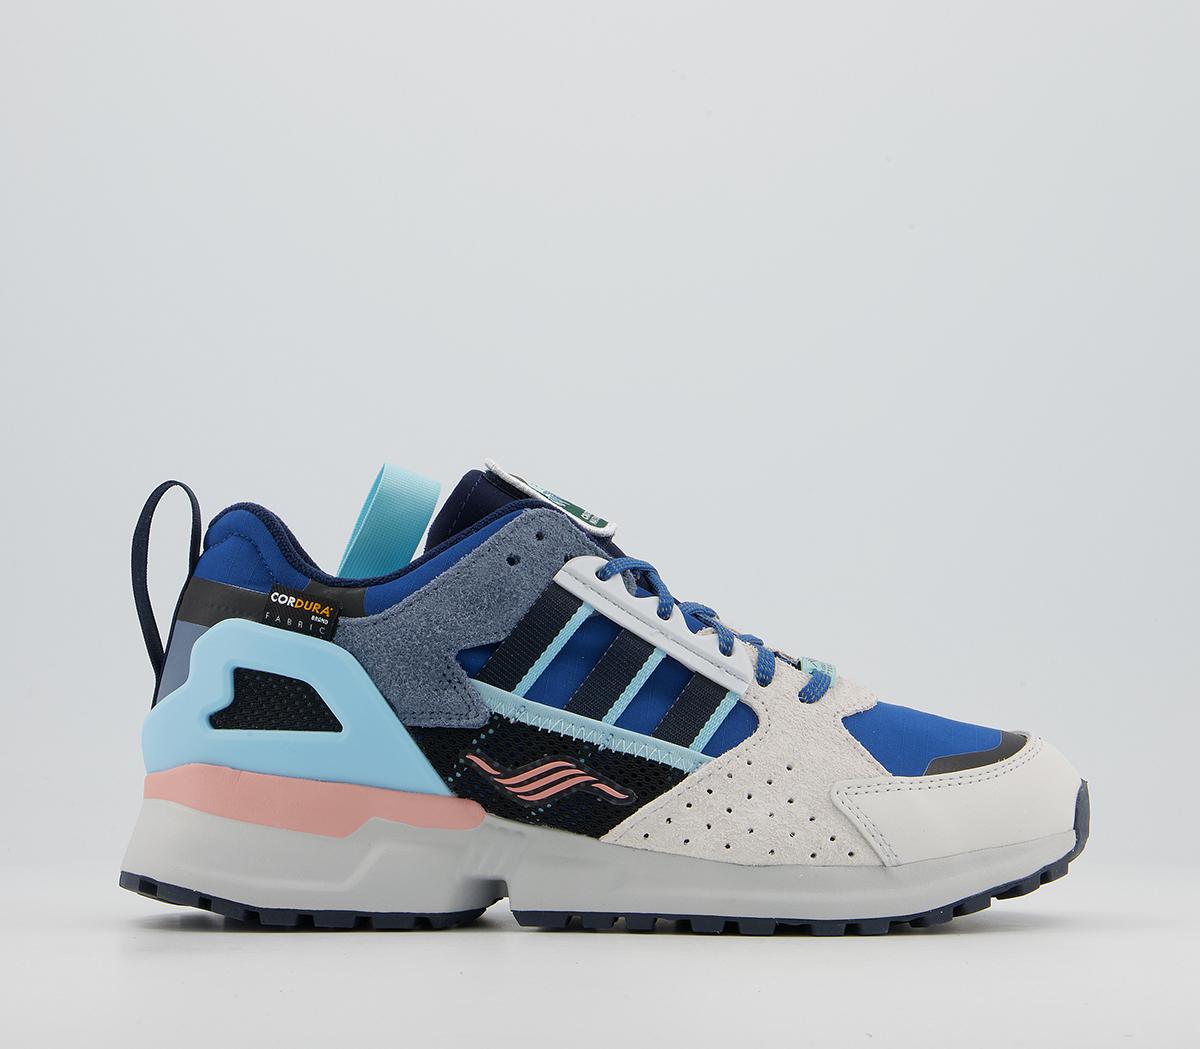 zx10000 trainers